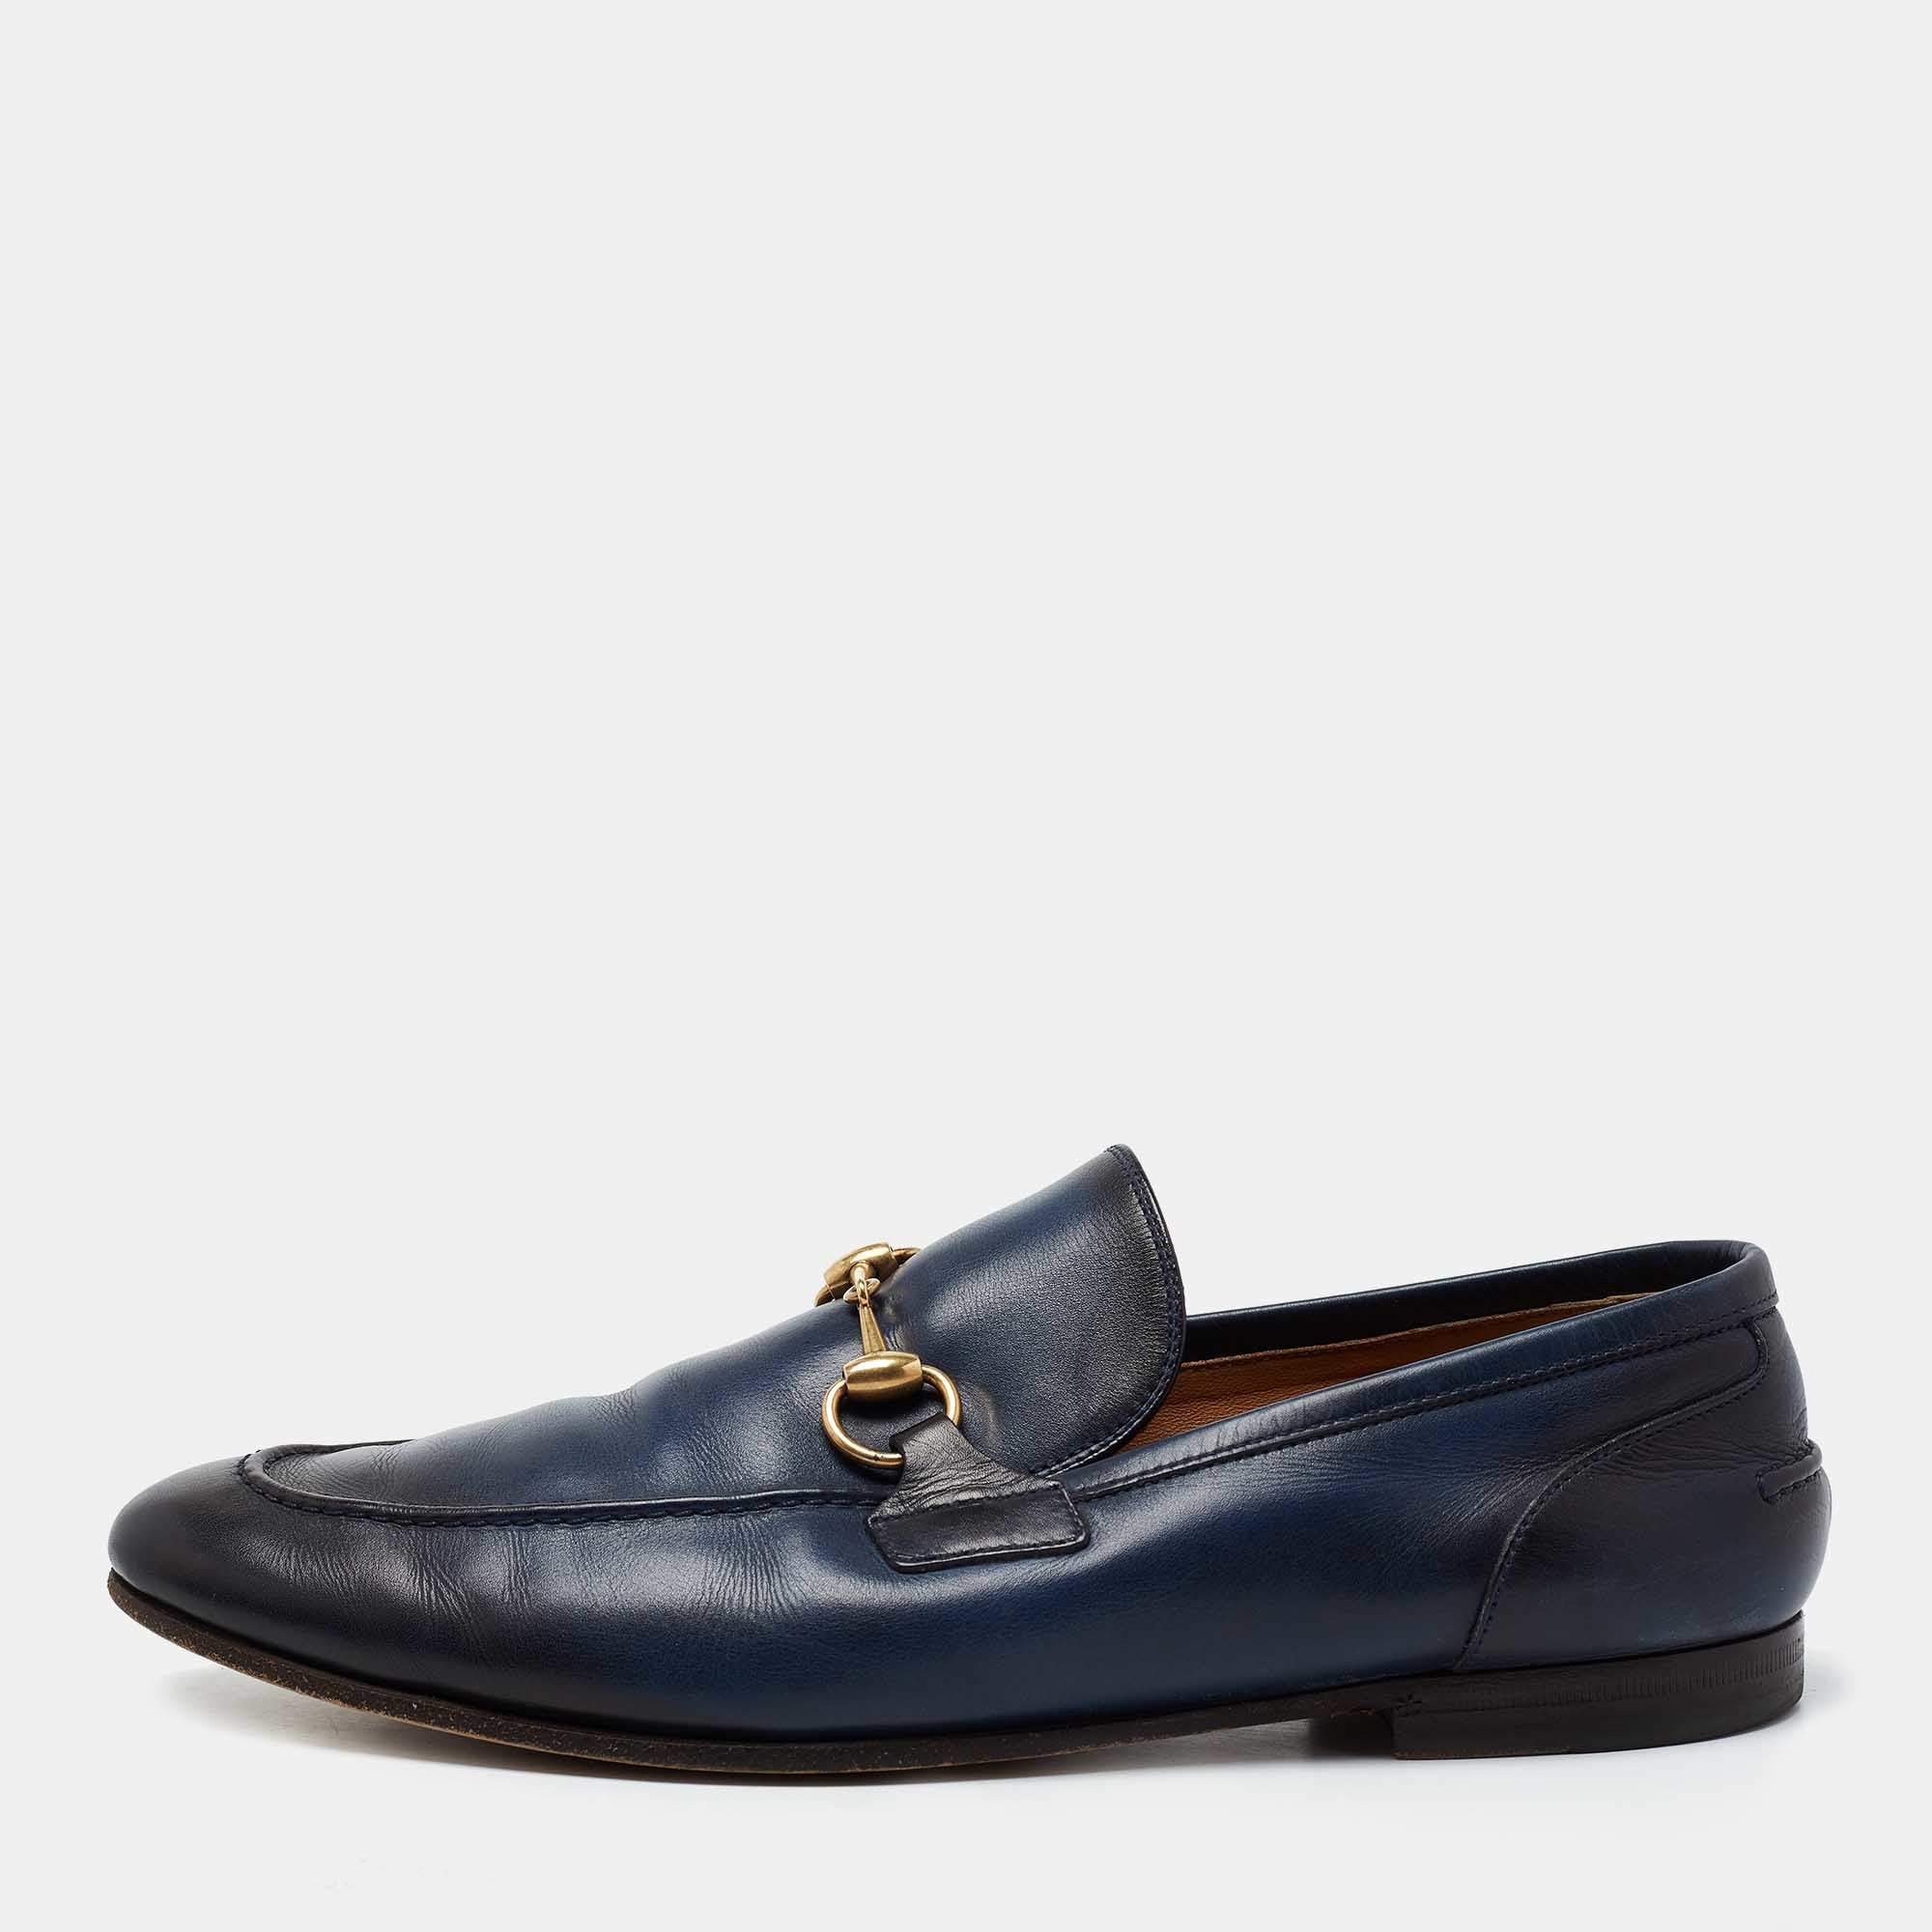 Gucci Navy Blue/Black Leather Jordaan Loafers Size 42.5